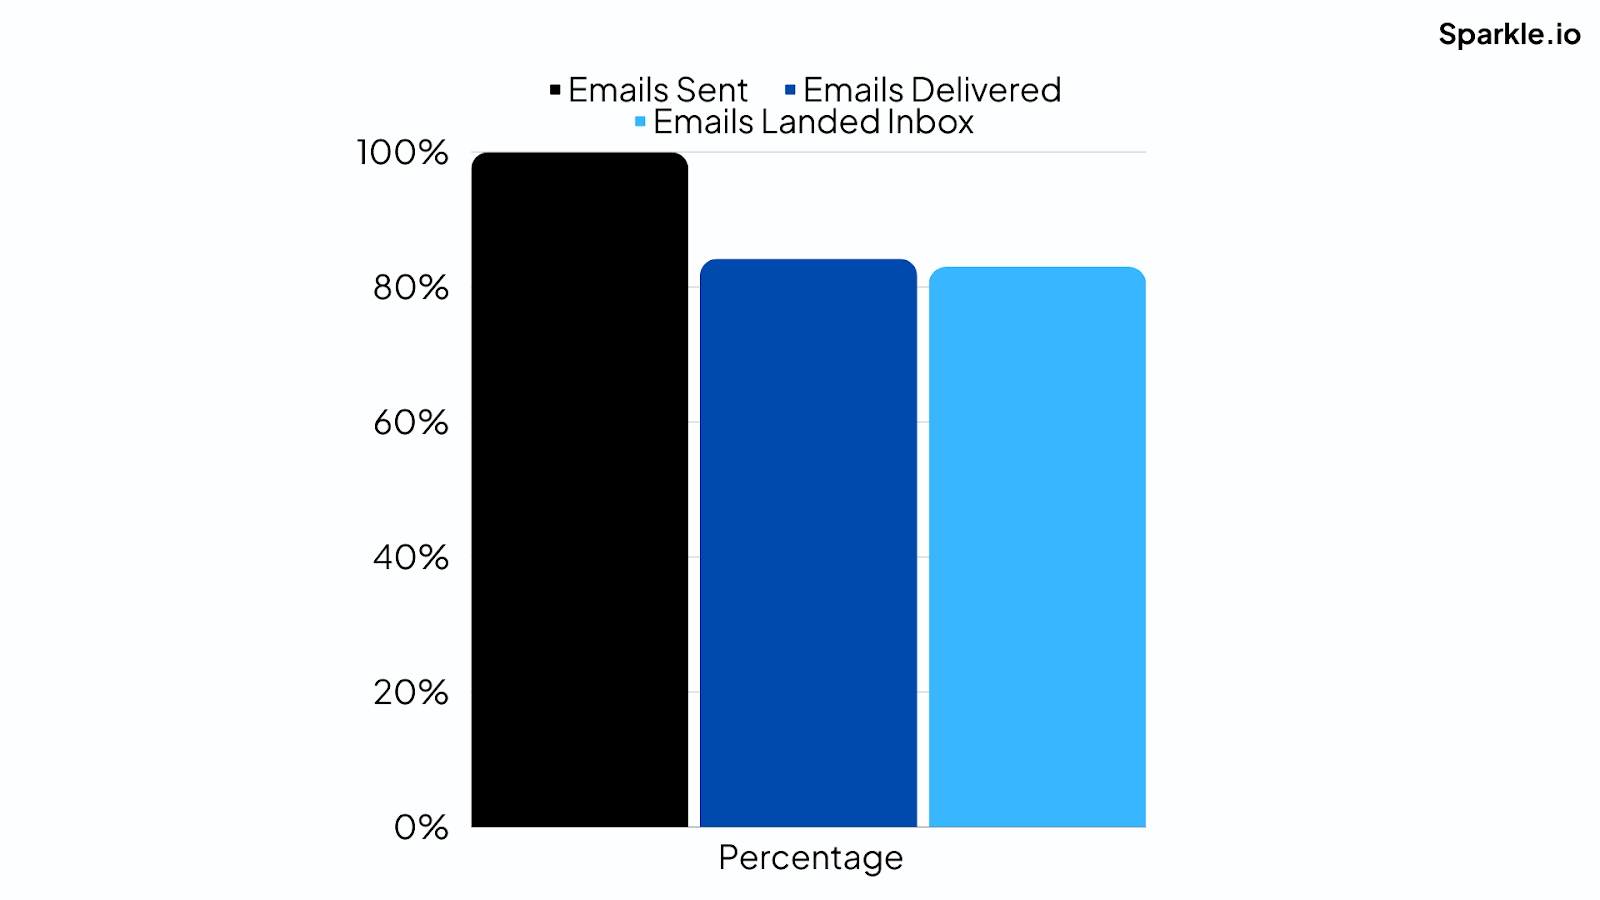 Bar graph showing that not all emails sent are being delivered